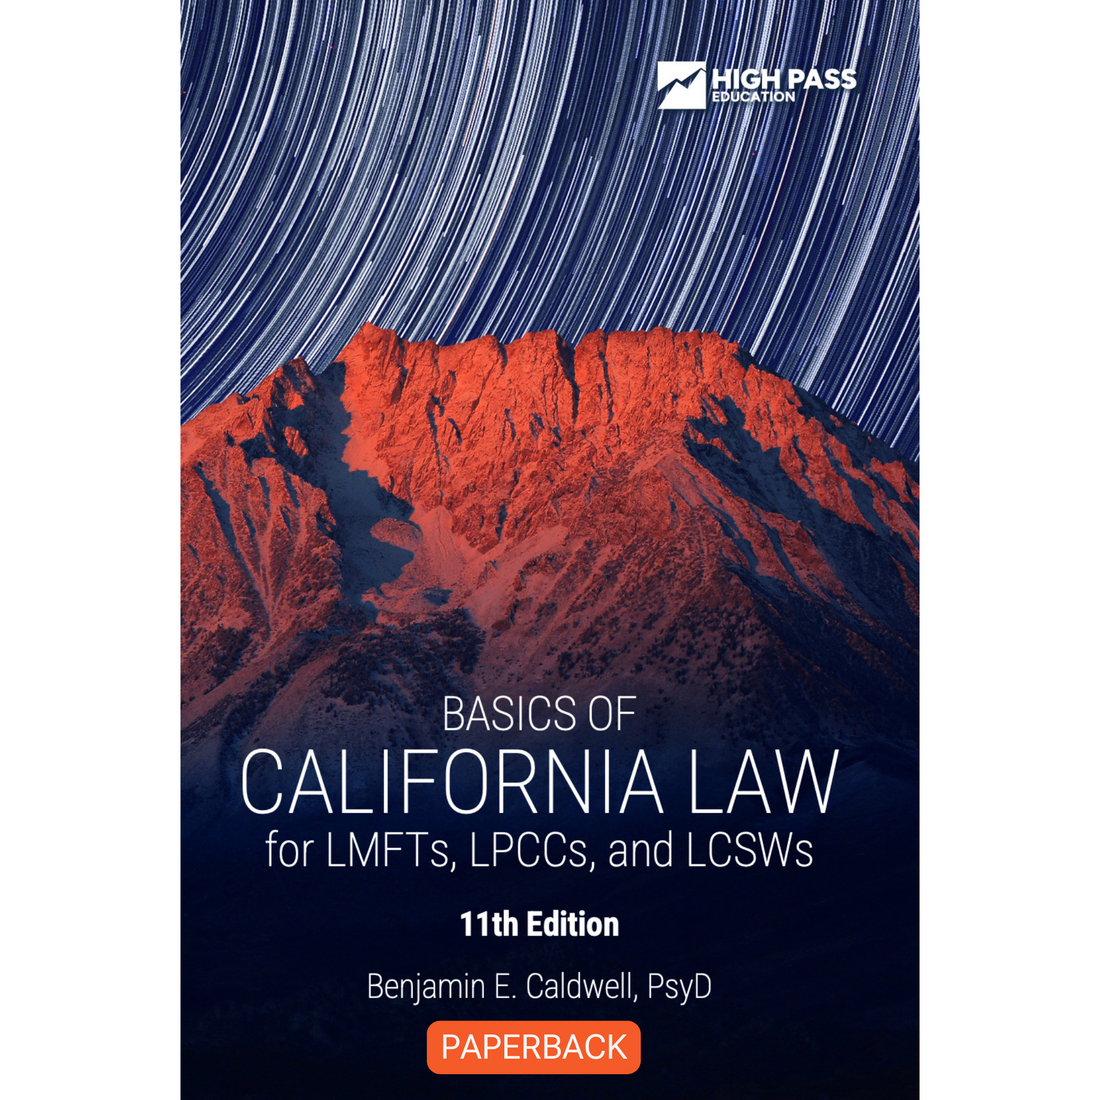 Basics of California Law for LMFTs, LPCCs, and LCSWs, 11th ed - paperback version